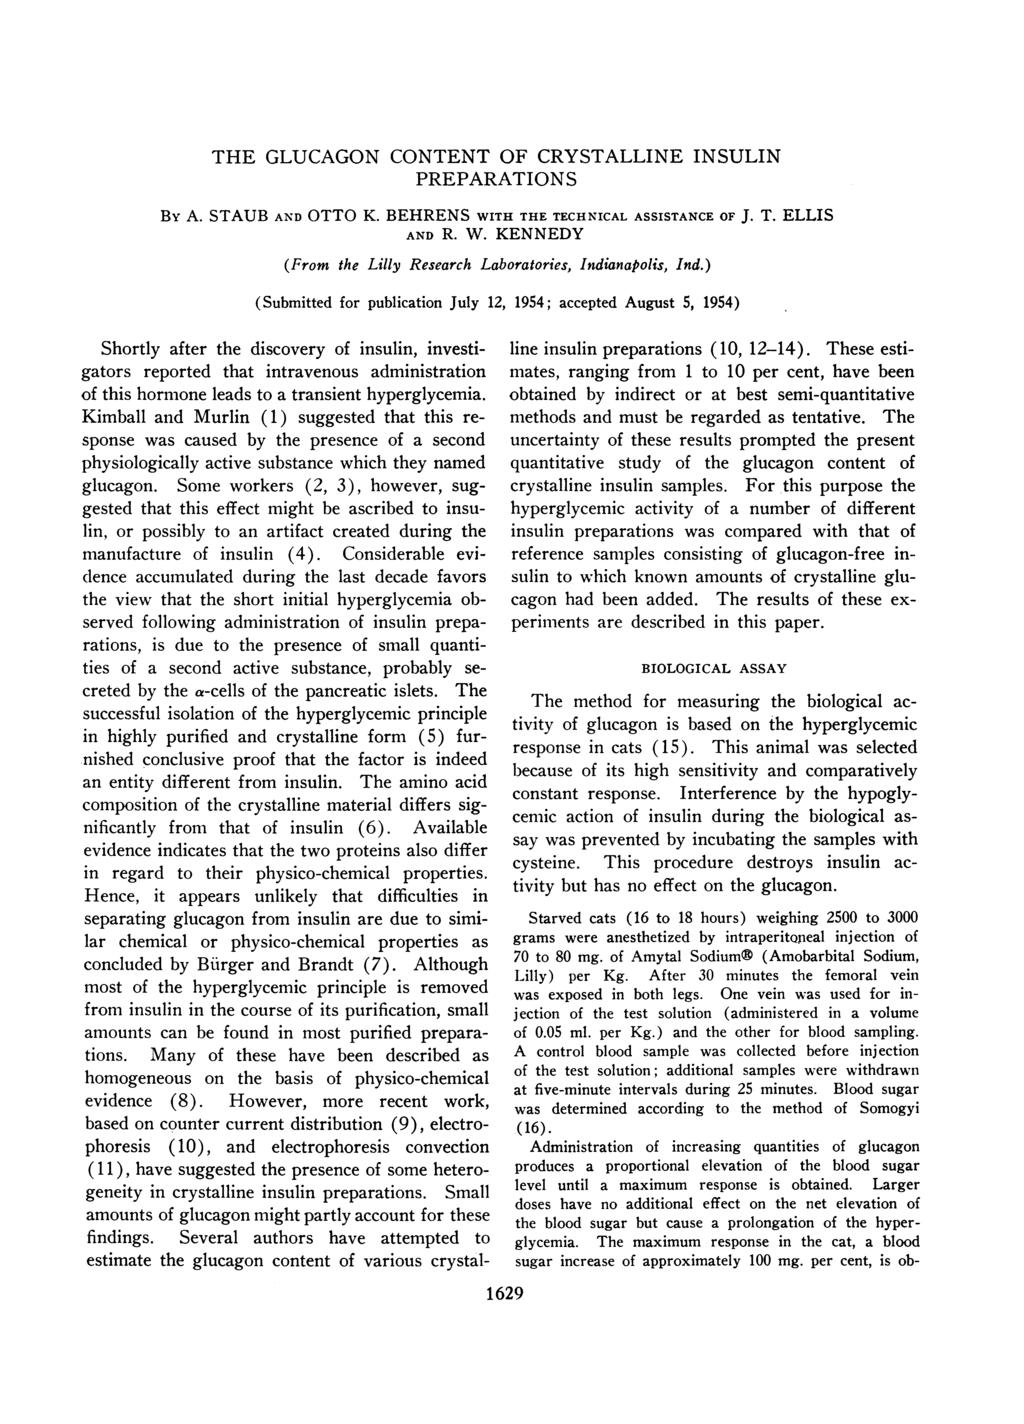 THE GLUCAGON CONTENT OF CRYSTALLINE INSULIN PREPARATIONS By A. STAUB AND OTTO K. BEHRENS WITH THE TECHNICAL ASSISTANCE OF J. T. ELLIS AND R. W. KENNEDY (From the Lilly Research Laboratories, Indianapolis, Ind.